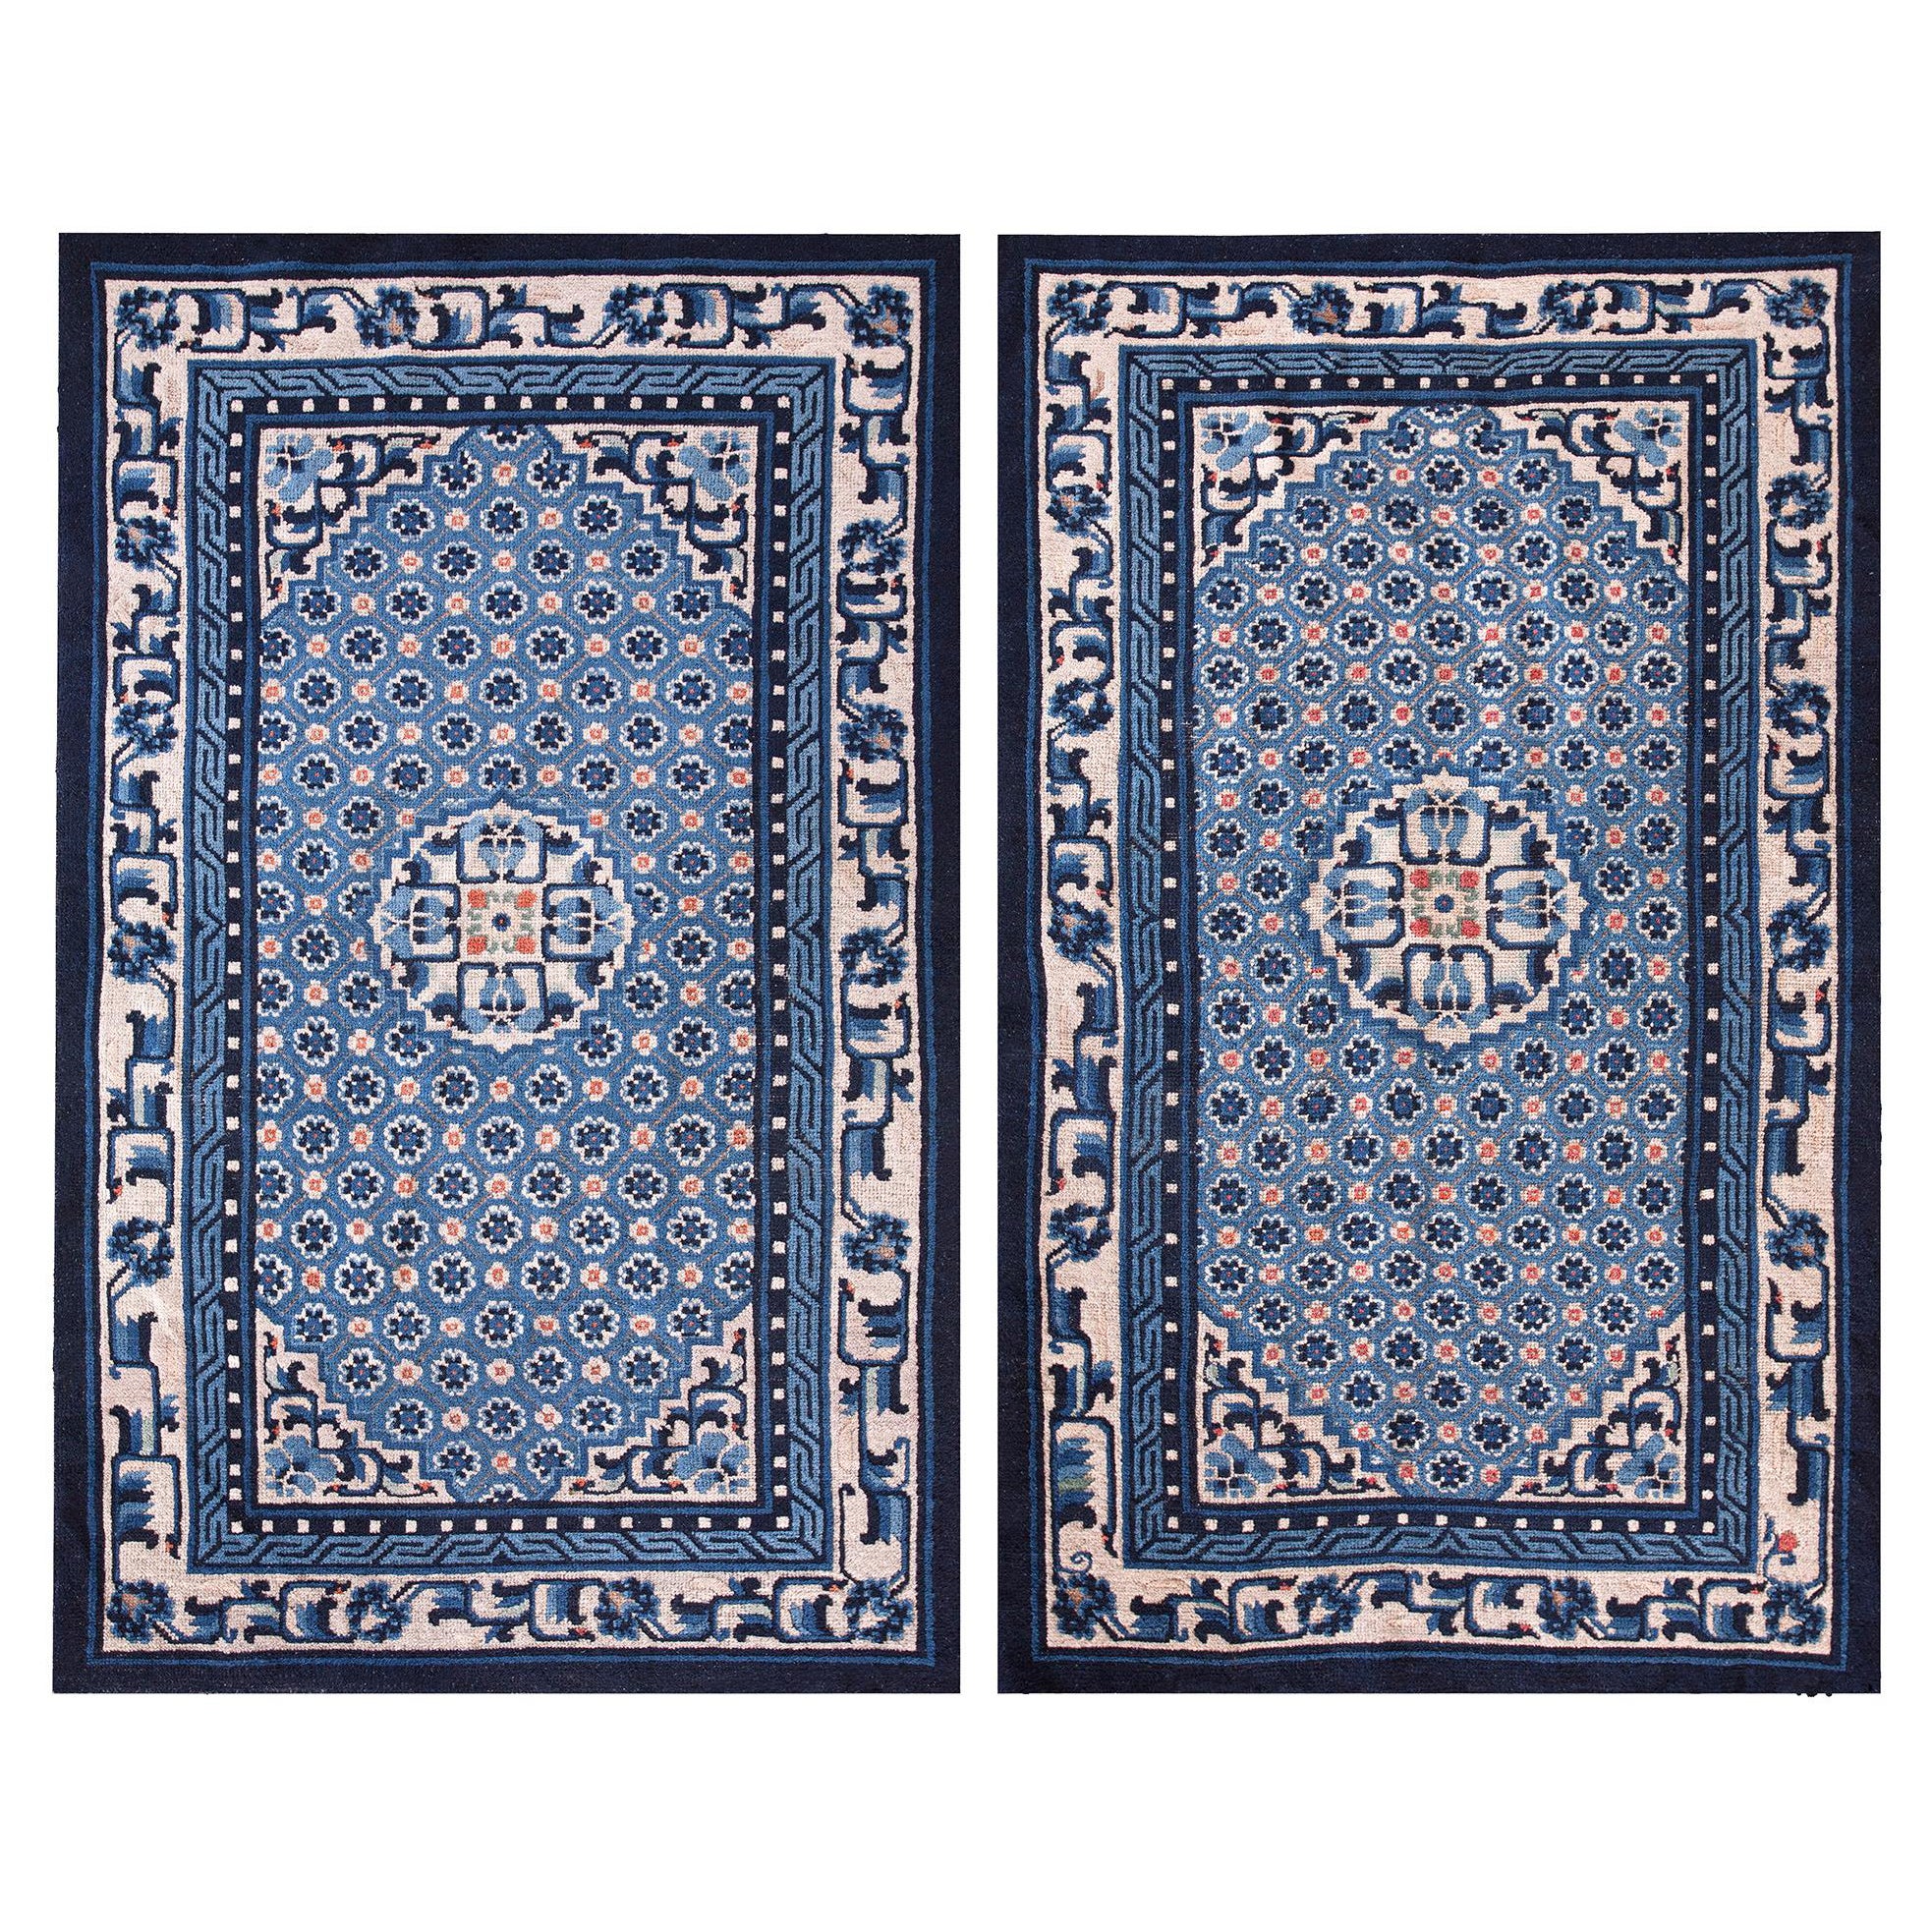 Early 20th Century Pair of  Chinese Peking carpets ( 3'2" x 5'2" - 97 x 158 )